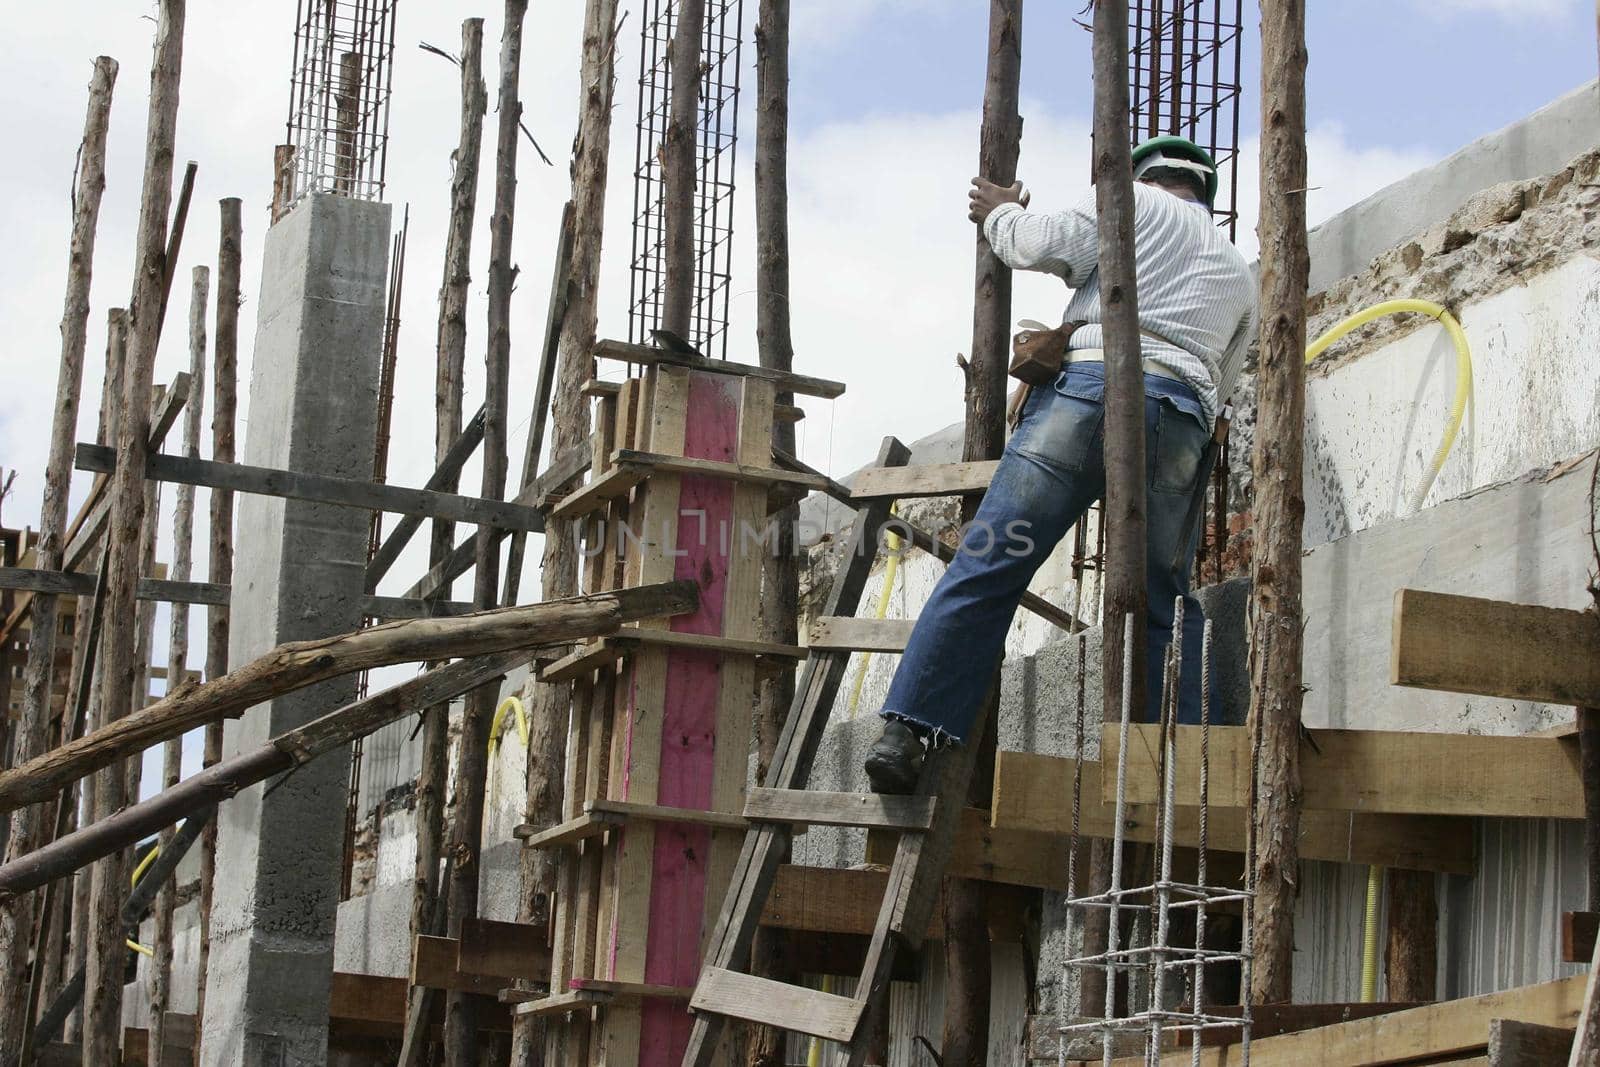 eunapolis, bahia / brazil - august 25, 2009: Construction workers are seen on construction site in the city of Eunapolis.
